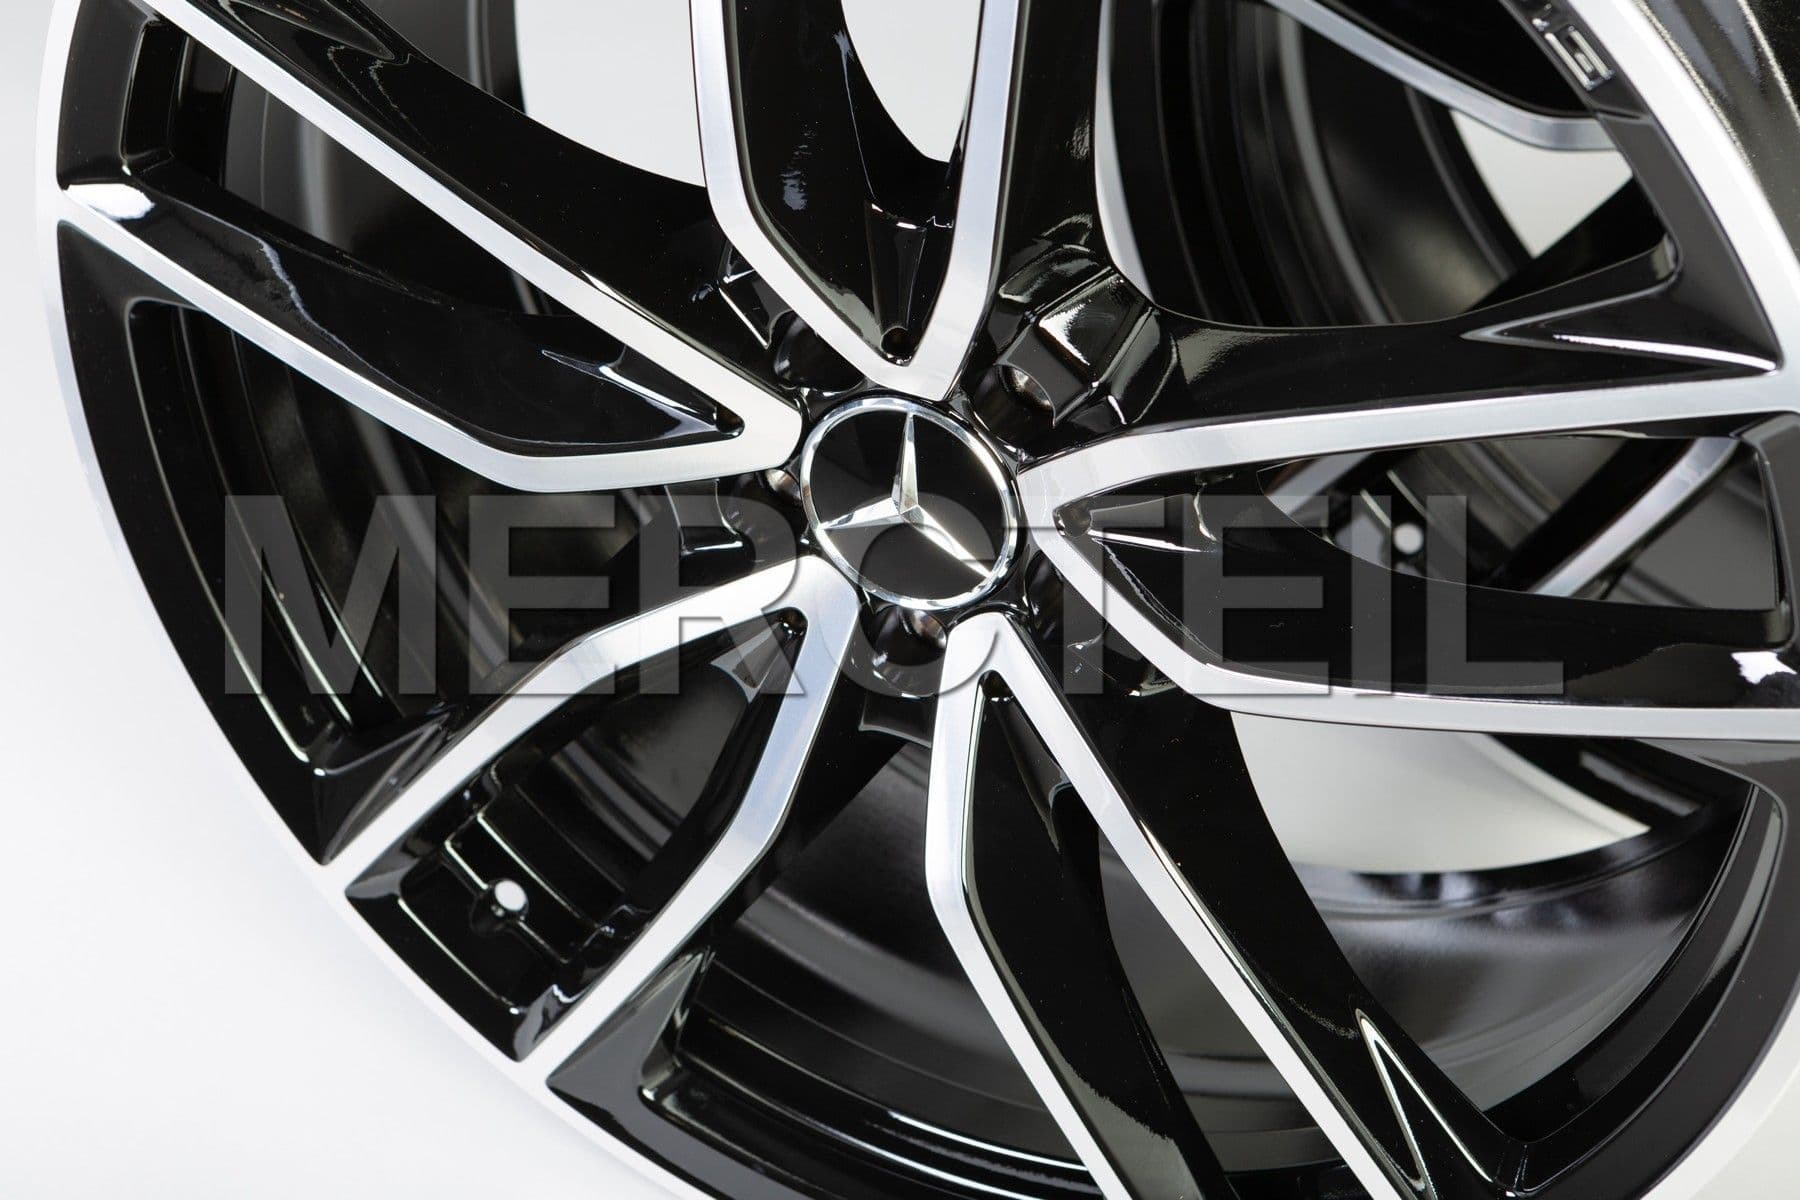 Mercedes A-Class IV Type 177 (F2A) Limousine 2,0l AMG A 35 4Matic 225kW  (306 hp) Wheels and Tyre Packages